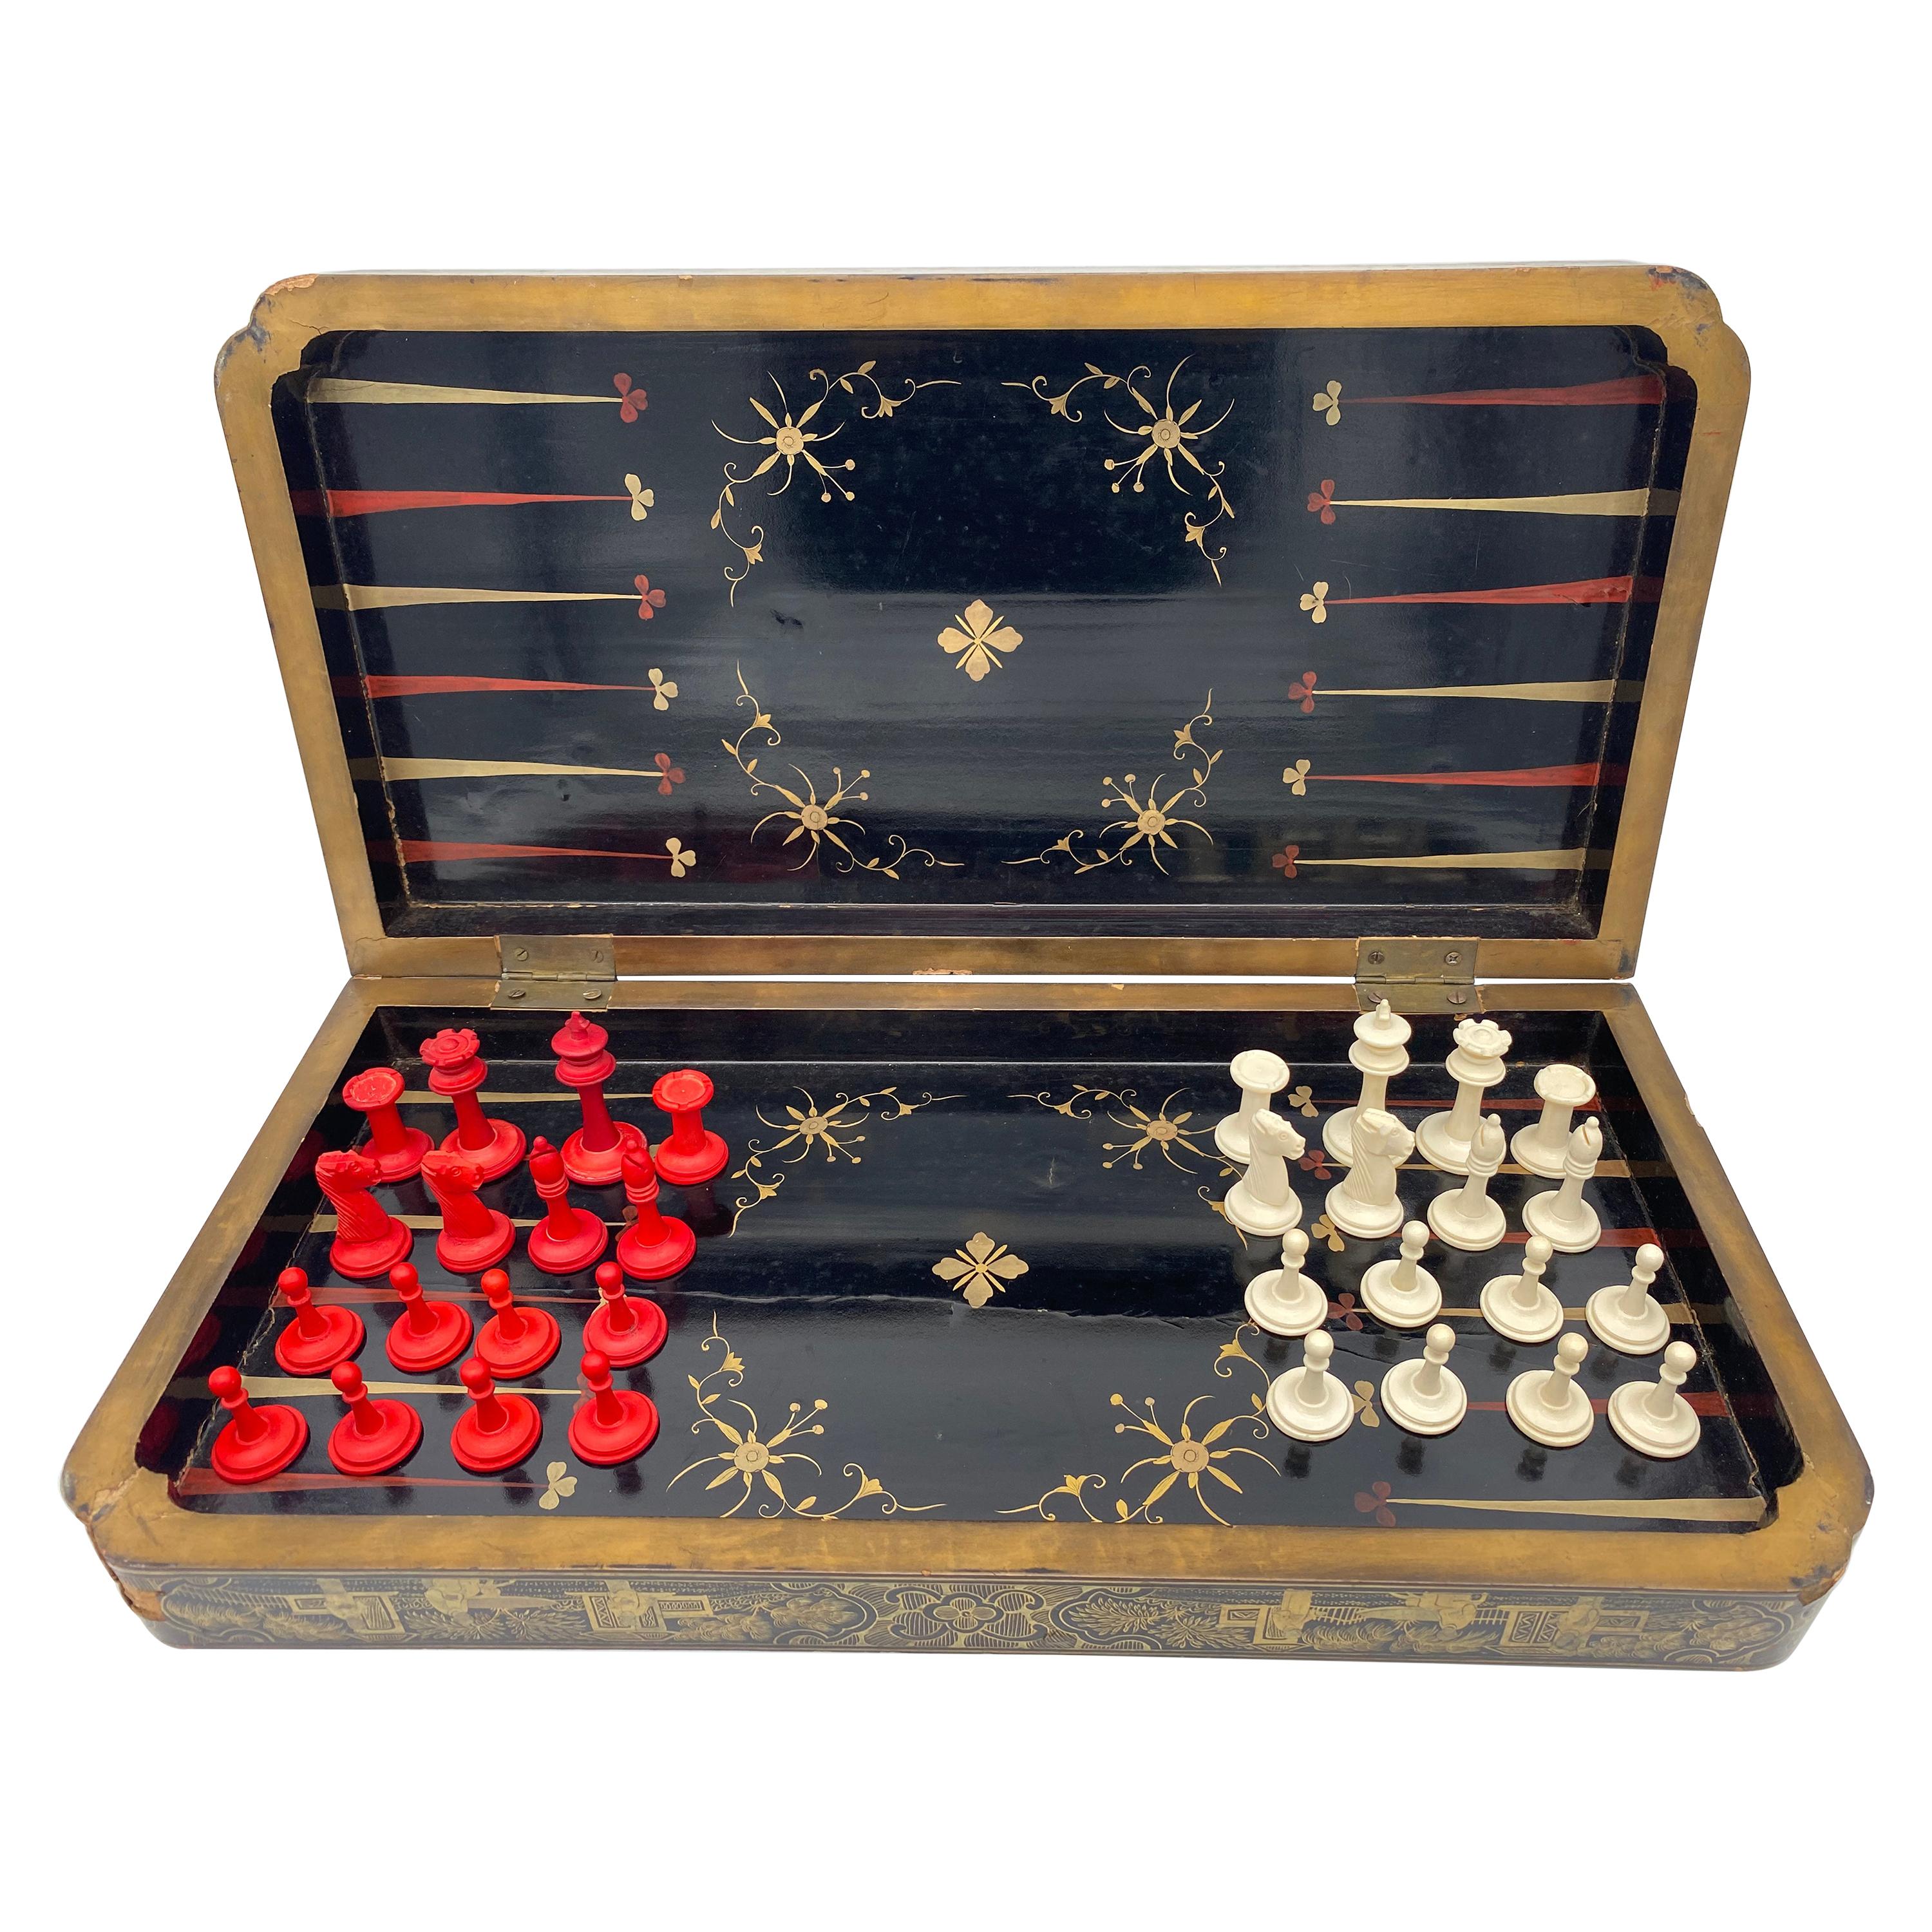 19th century Chinese export gilt decorated black lacquer gaming board. The game board painted with gilt seated figures in various poses on a black ground within a landscape vignette and floral border, opening to view a backgammon surface; together